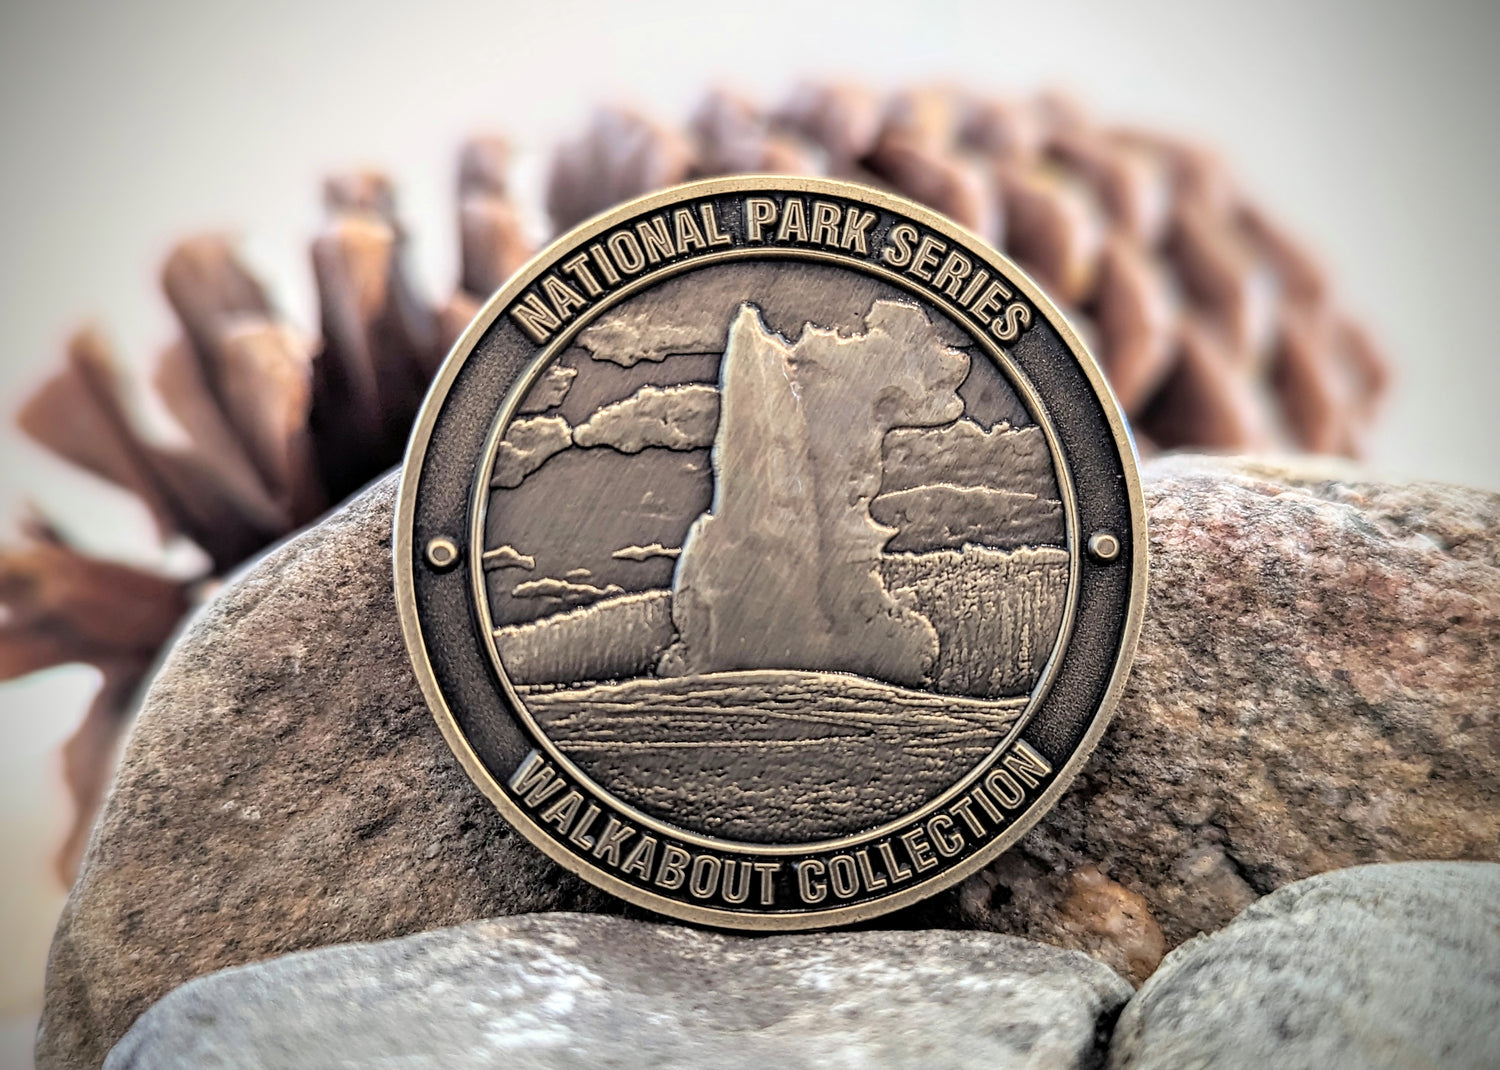 YELLOWSTONE NATIONAL PARK CHALLENGE COIN